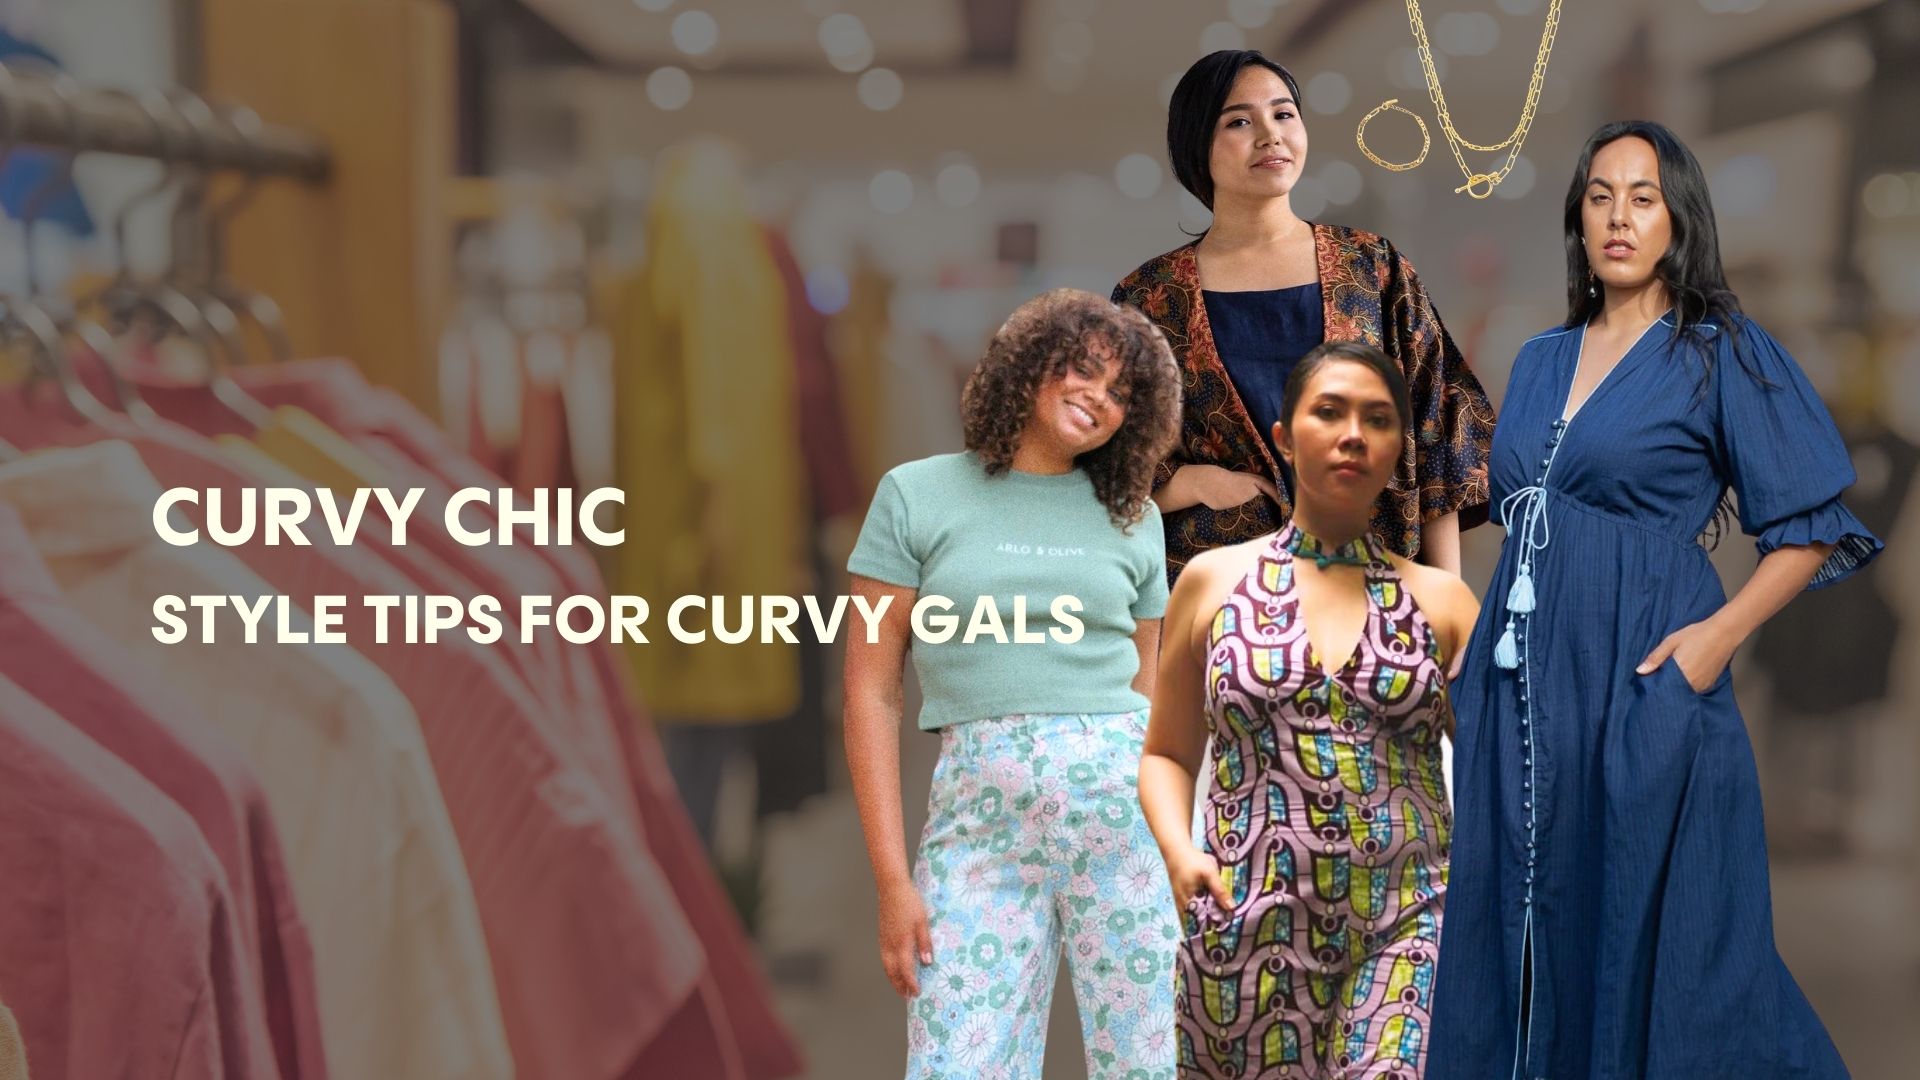 Curvy Chic: Style Tips for Curvy Gals